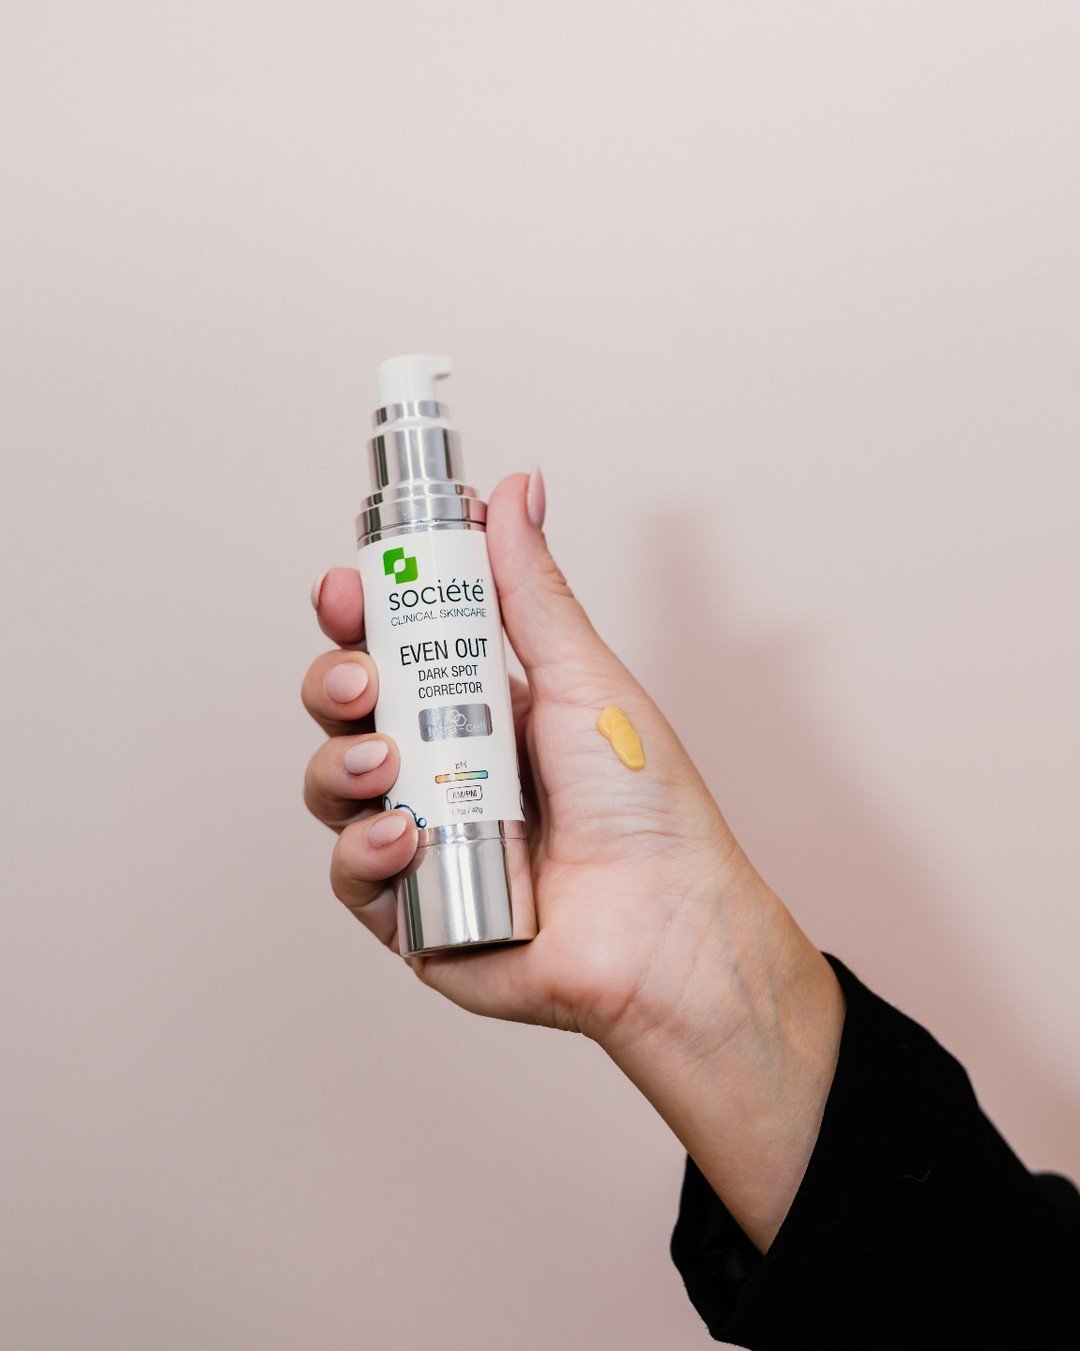 🌟 HAPPY MONDAY! For April's last Monday, we're bringing you a must-have skincare essential you won't want to miss out on &mdash; the EVEN OUT Dark Spot Corrector by @societeskincare! Say goodbye to uneven skin tone and hello to a brighter, more lumi